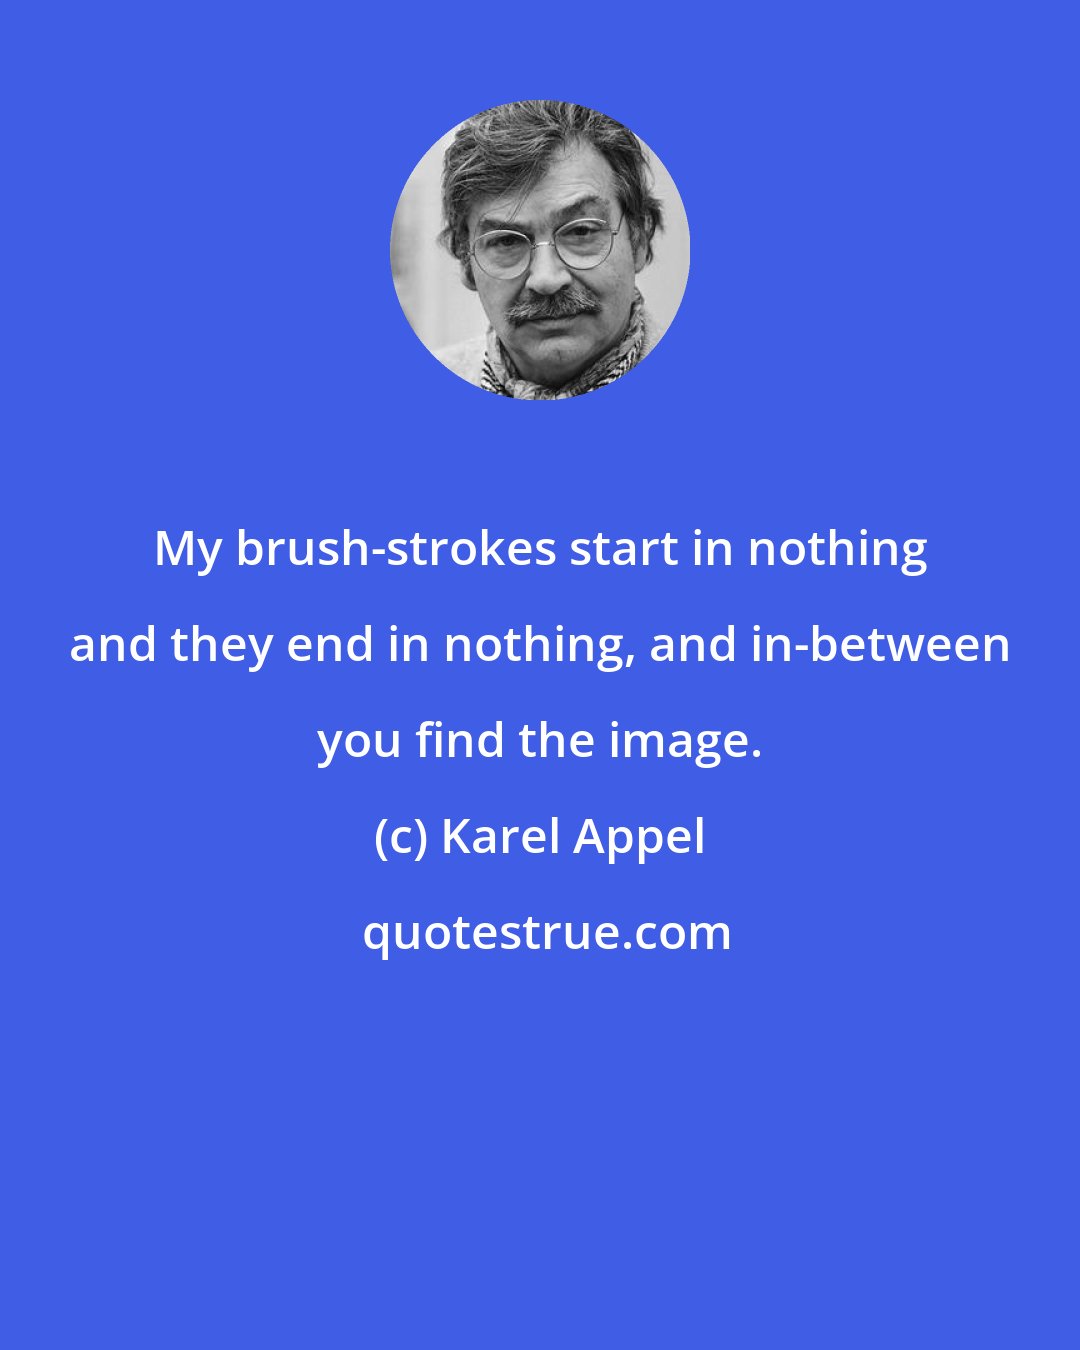 Karel Appel: My brush-strokes start in nothing and they end in nothing, and in-between you find the image.